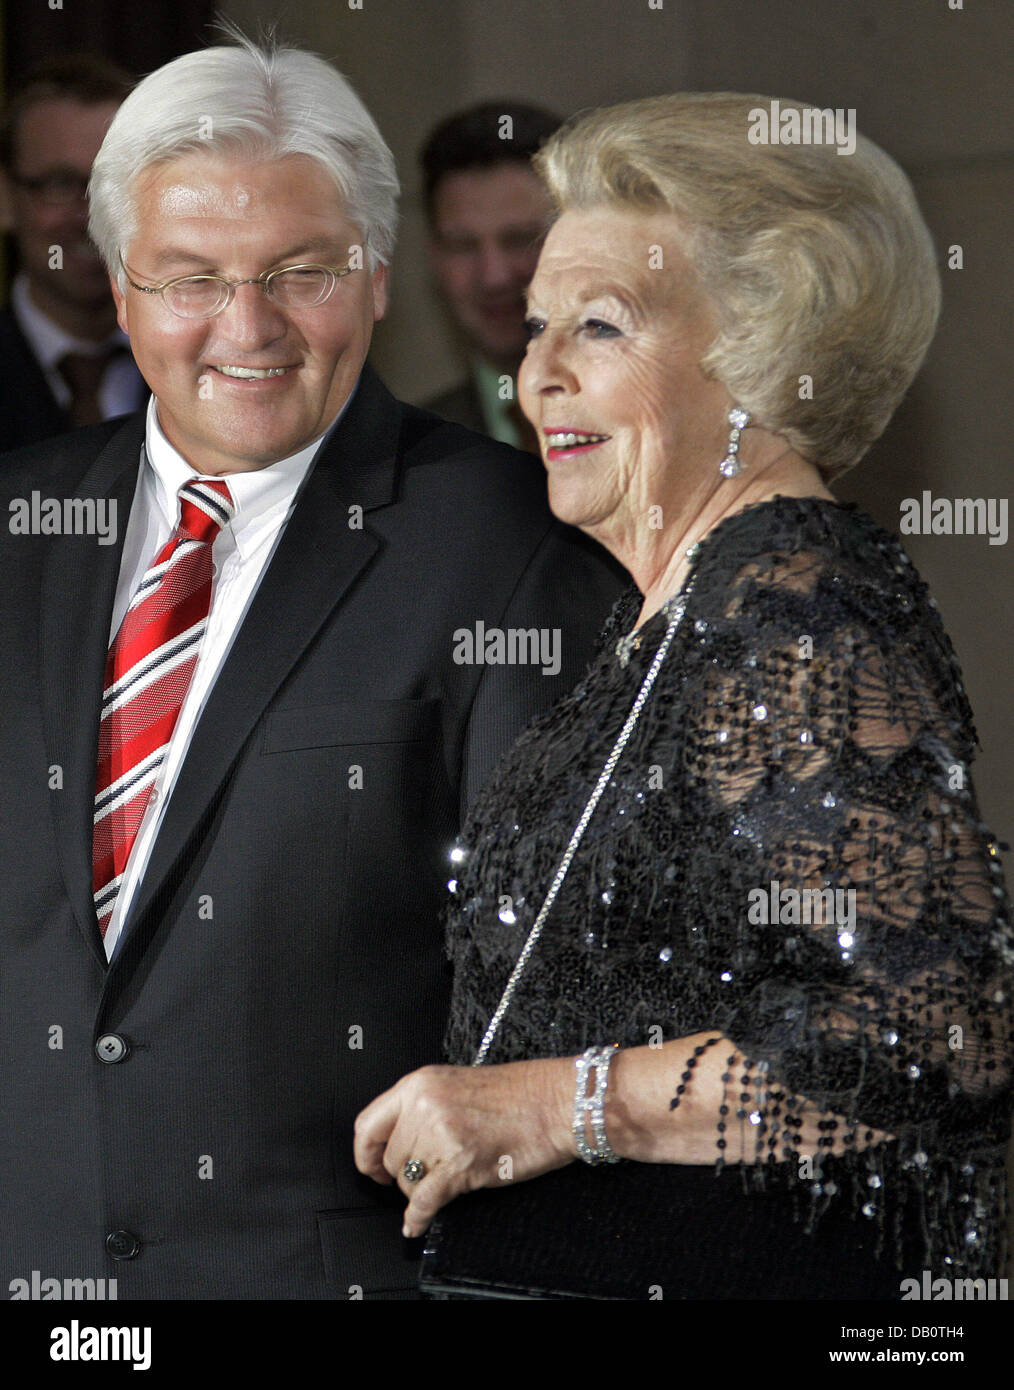 Queen Beatrix of the Netherlands (R) is welcomed by German Foreign Minister Frank-Walter Steinmeier (L) to the international gala evening introducing the Centre for European Studies in Berlin, Germany, 24 September 2007. The German Foreign Office invited numerous celebrities to the event the hosted Queen Beatrix as Guest of Honour. Having paid a visit Berlin already several times,  Stock Photo